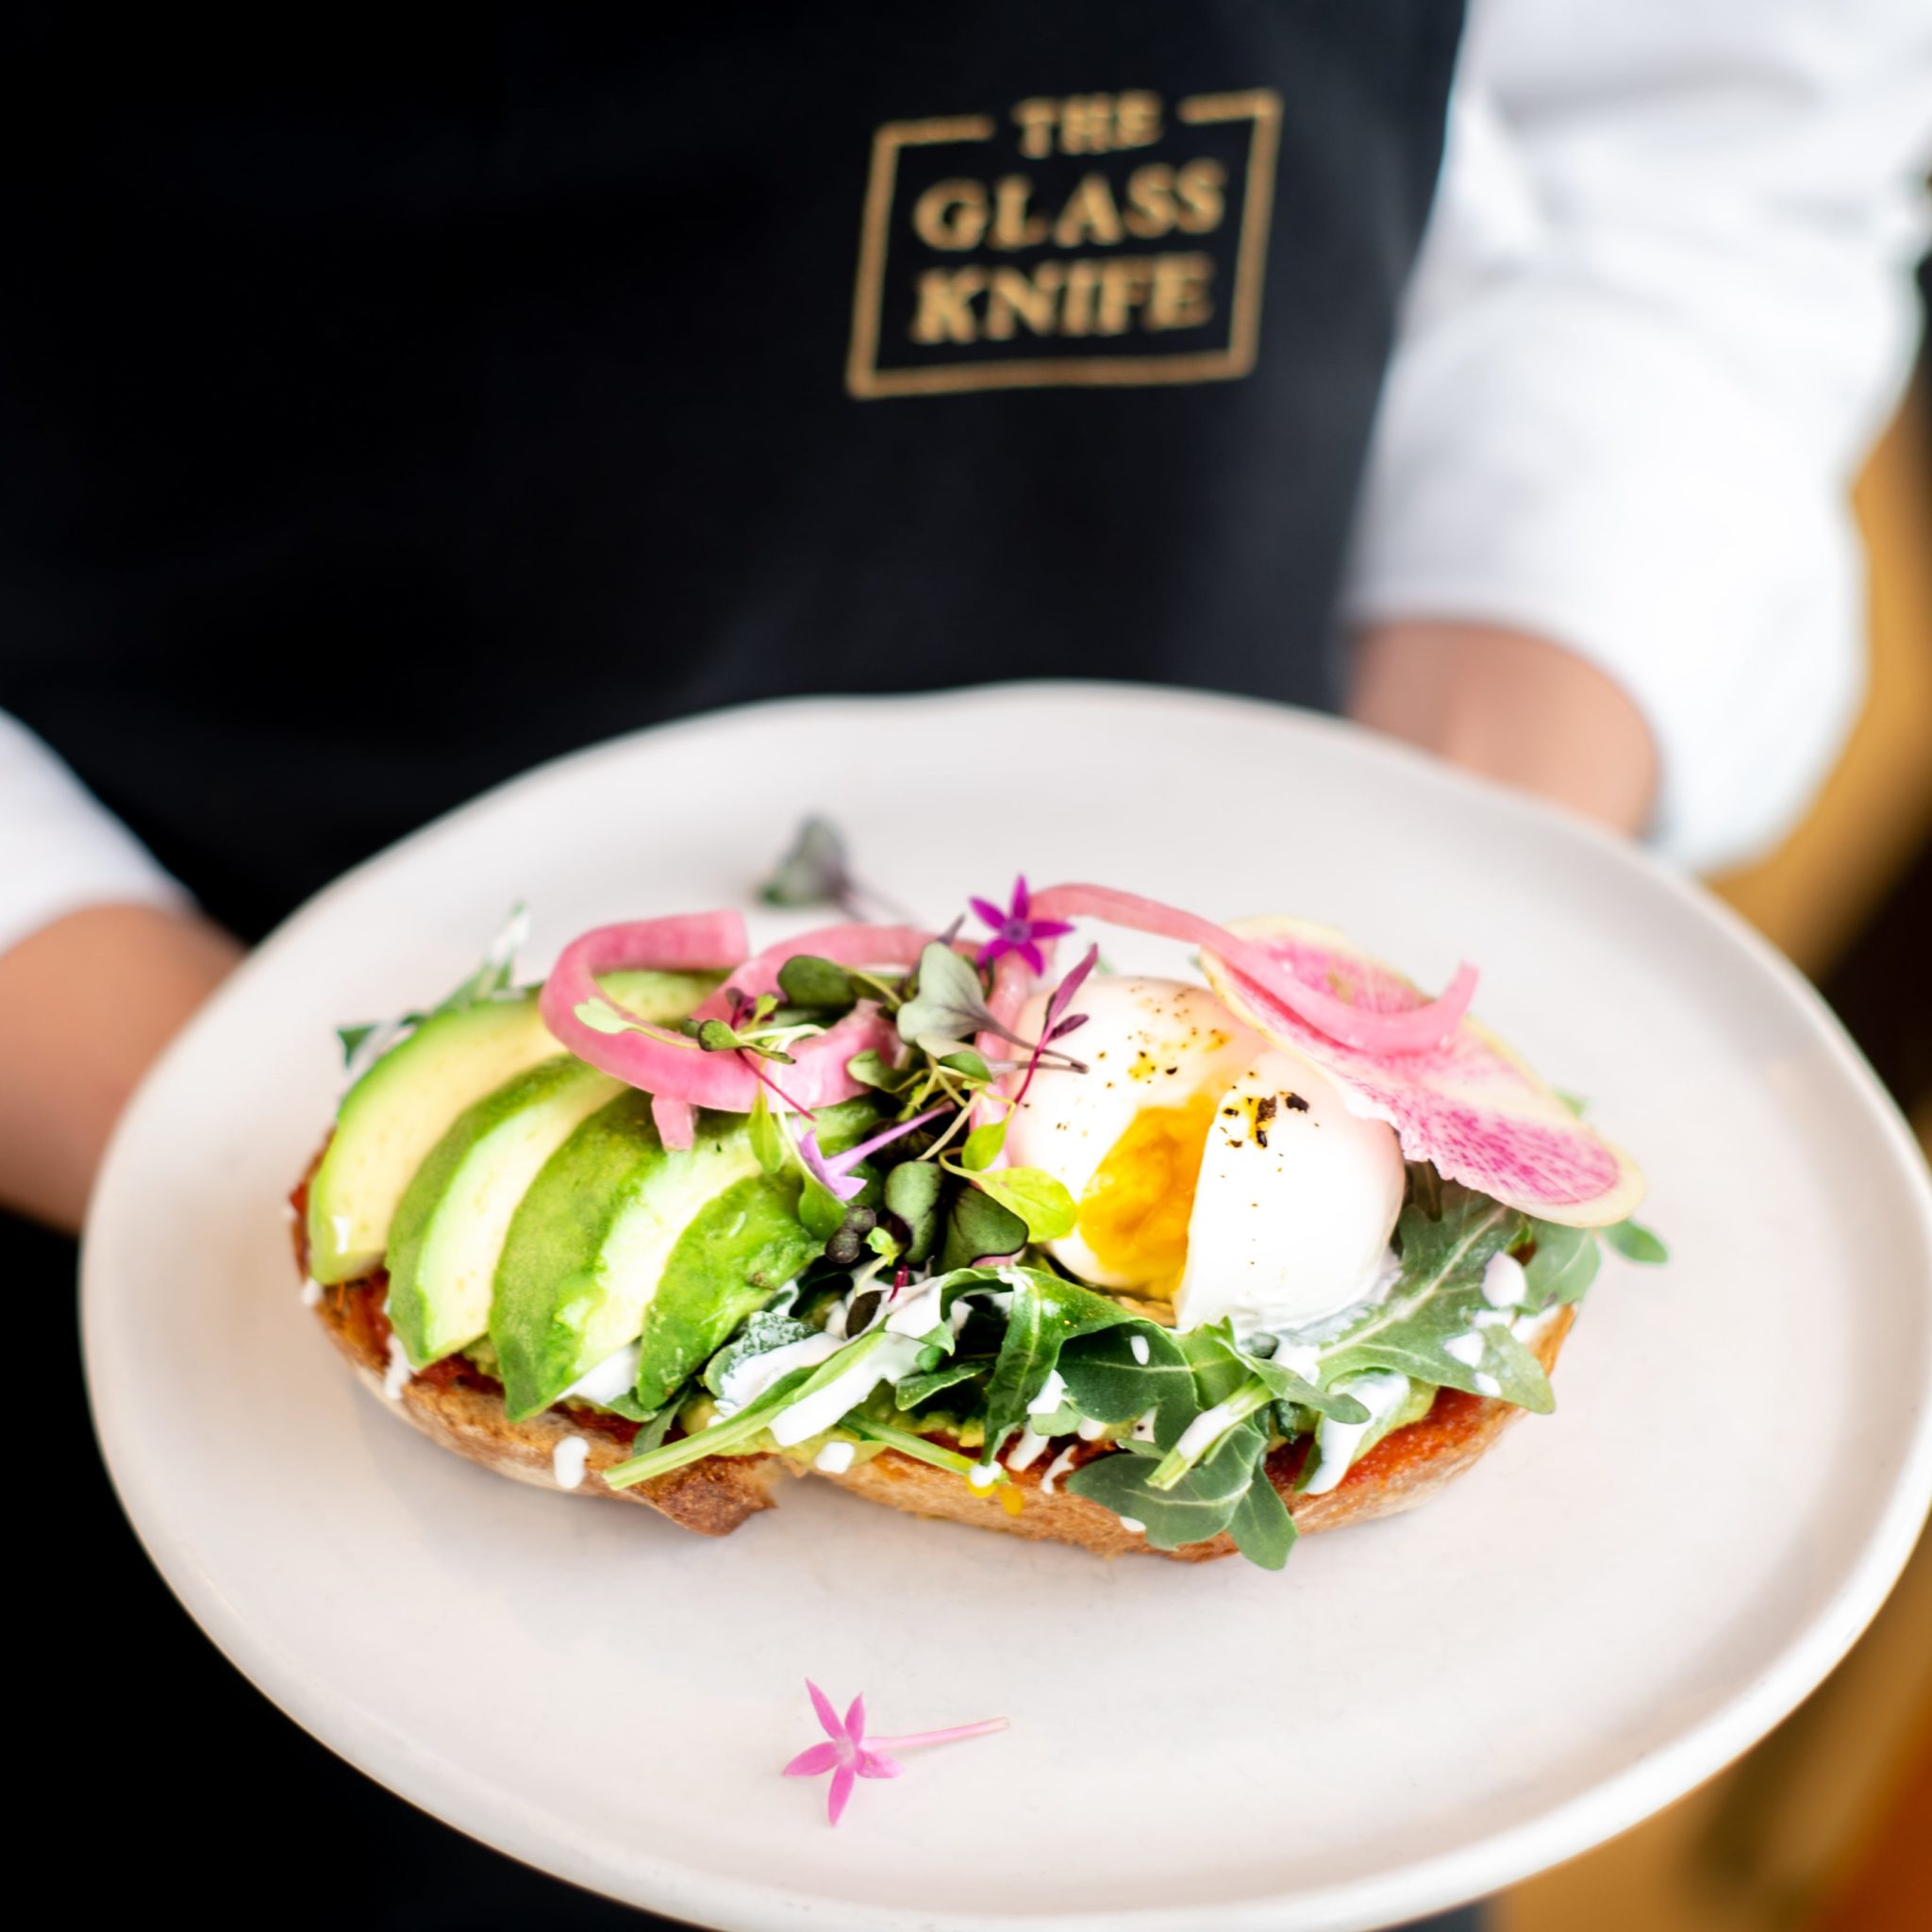 Breakfast Near Me and Winter Park Brunch Restaurant at The Glass Knife - Avocado and Egg Toast